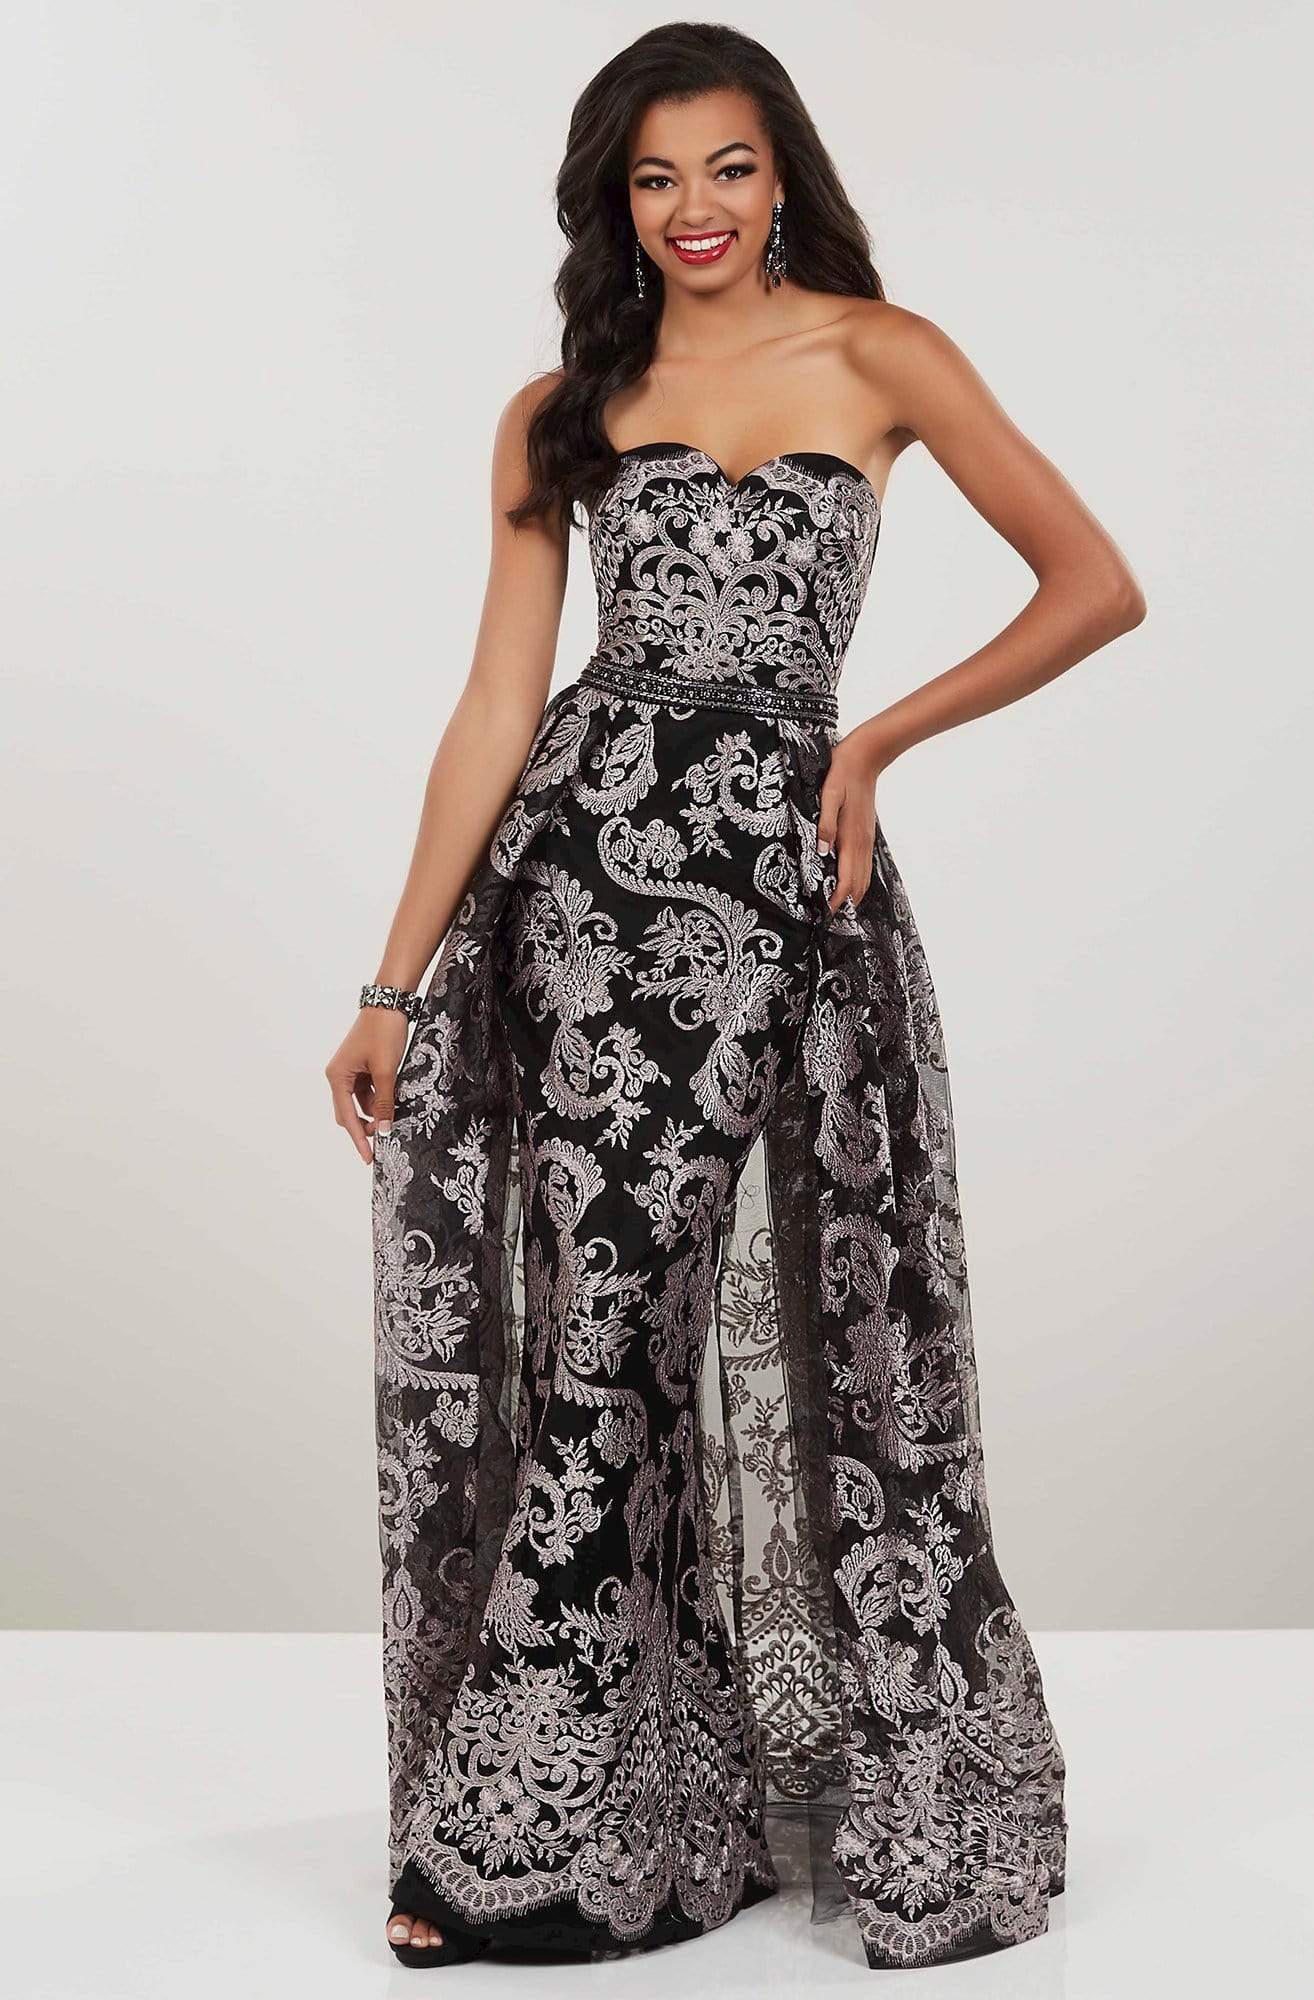 Panoply - 14937 Embroidered Strapless Dress with Overlay Special Occasion Dress 0 / Black/Blush